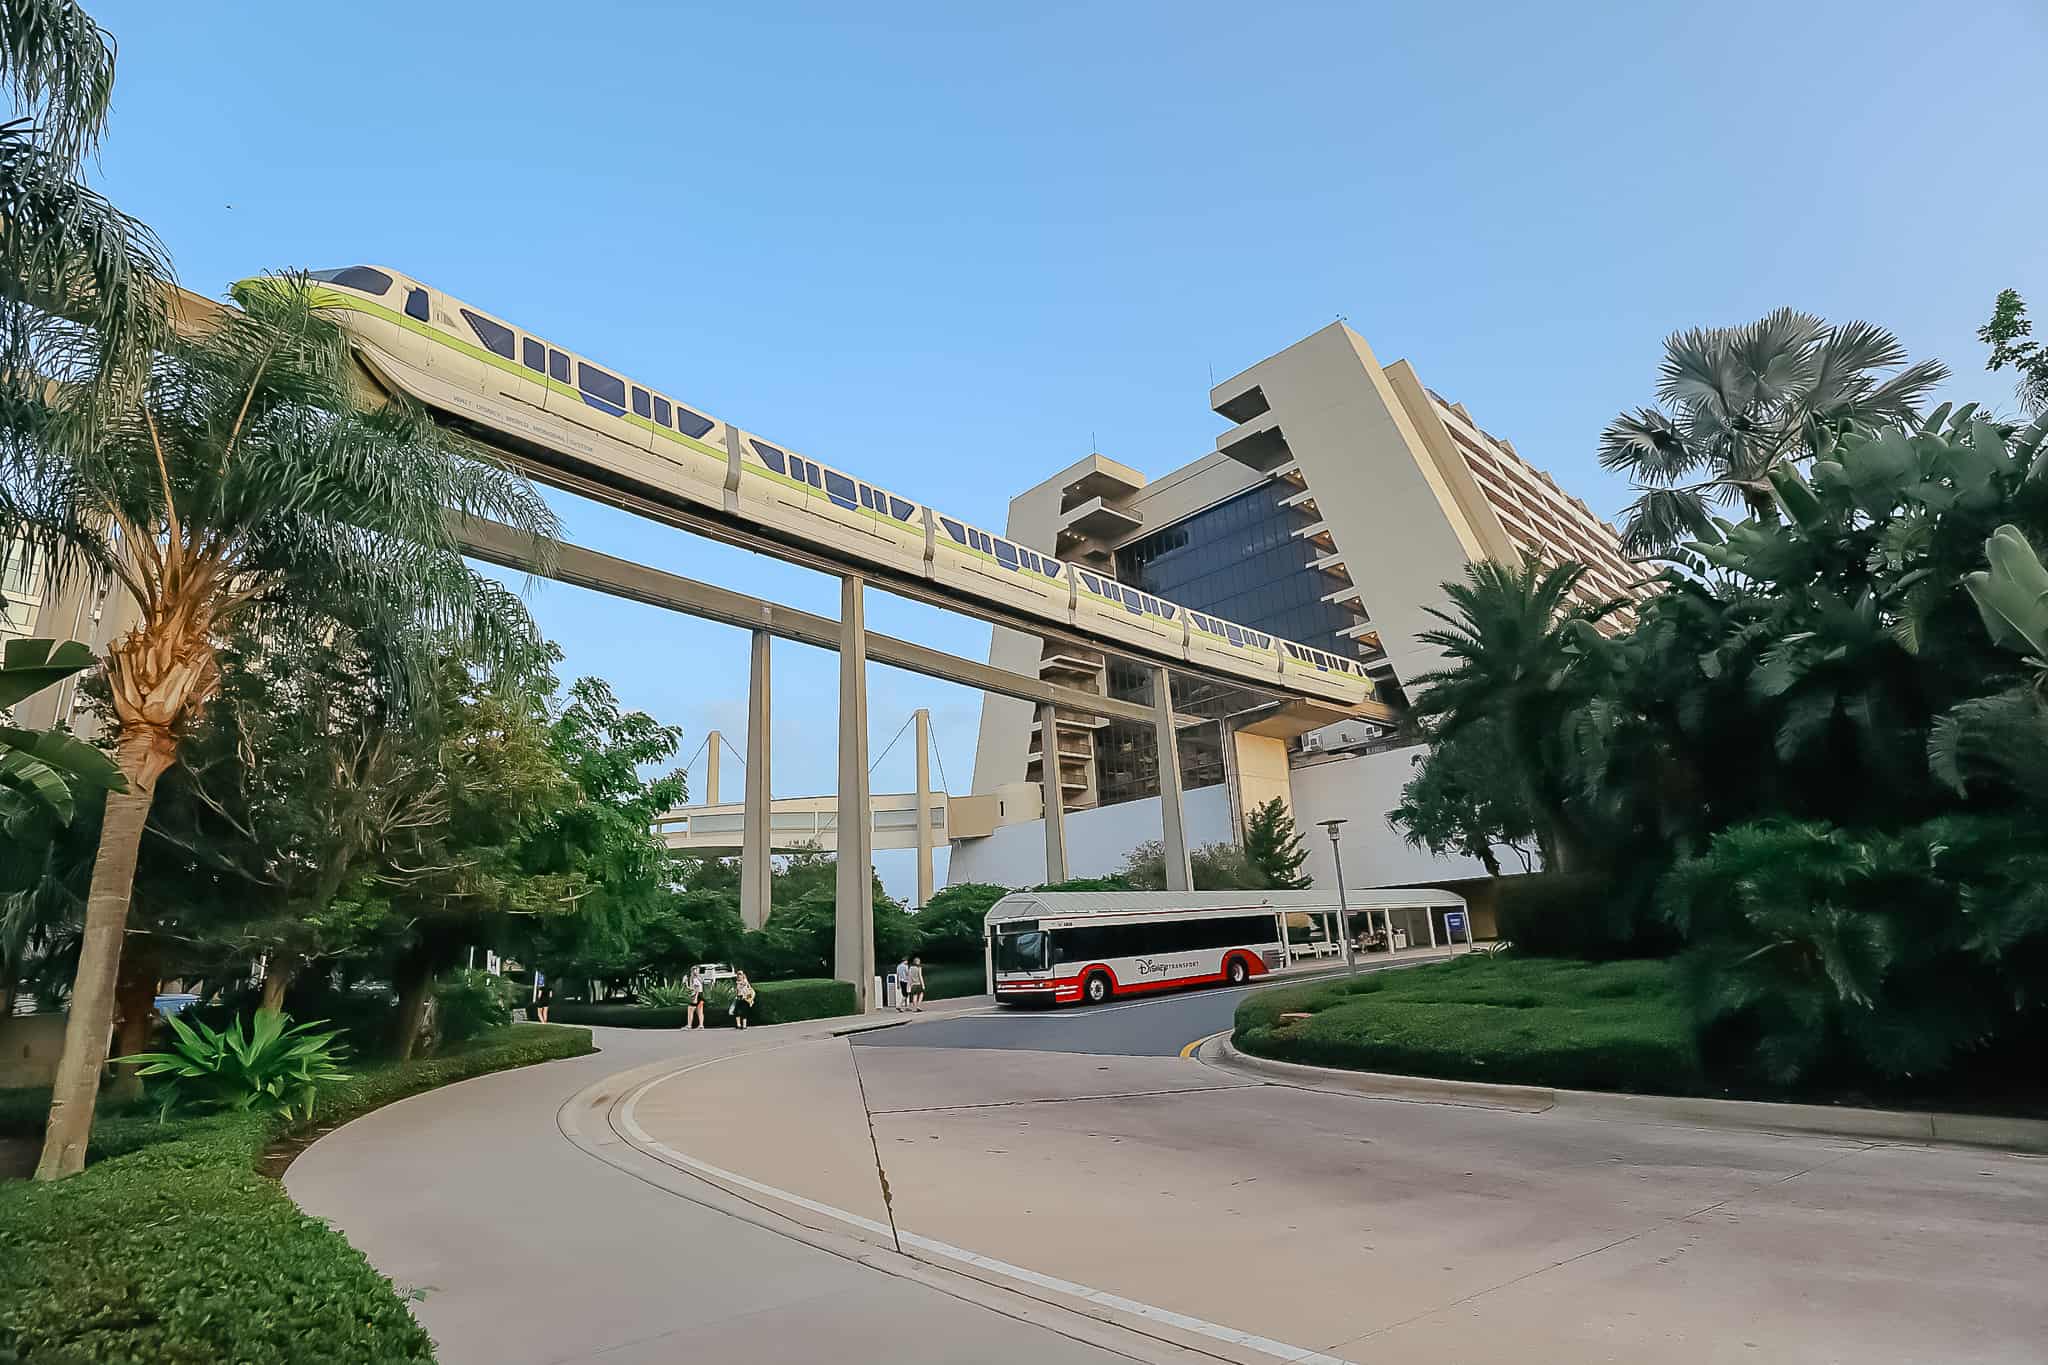 Disney’s Contemporary Resort Transportation Options (With How-To’s For Each Destination)